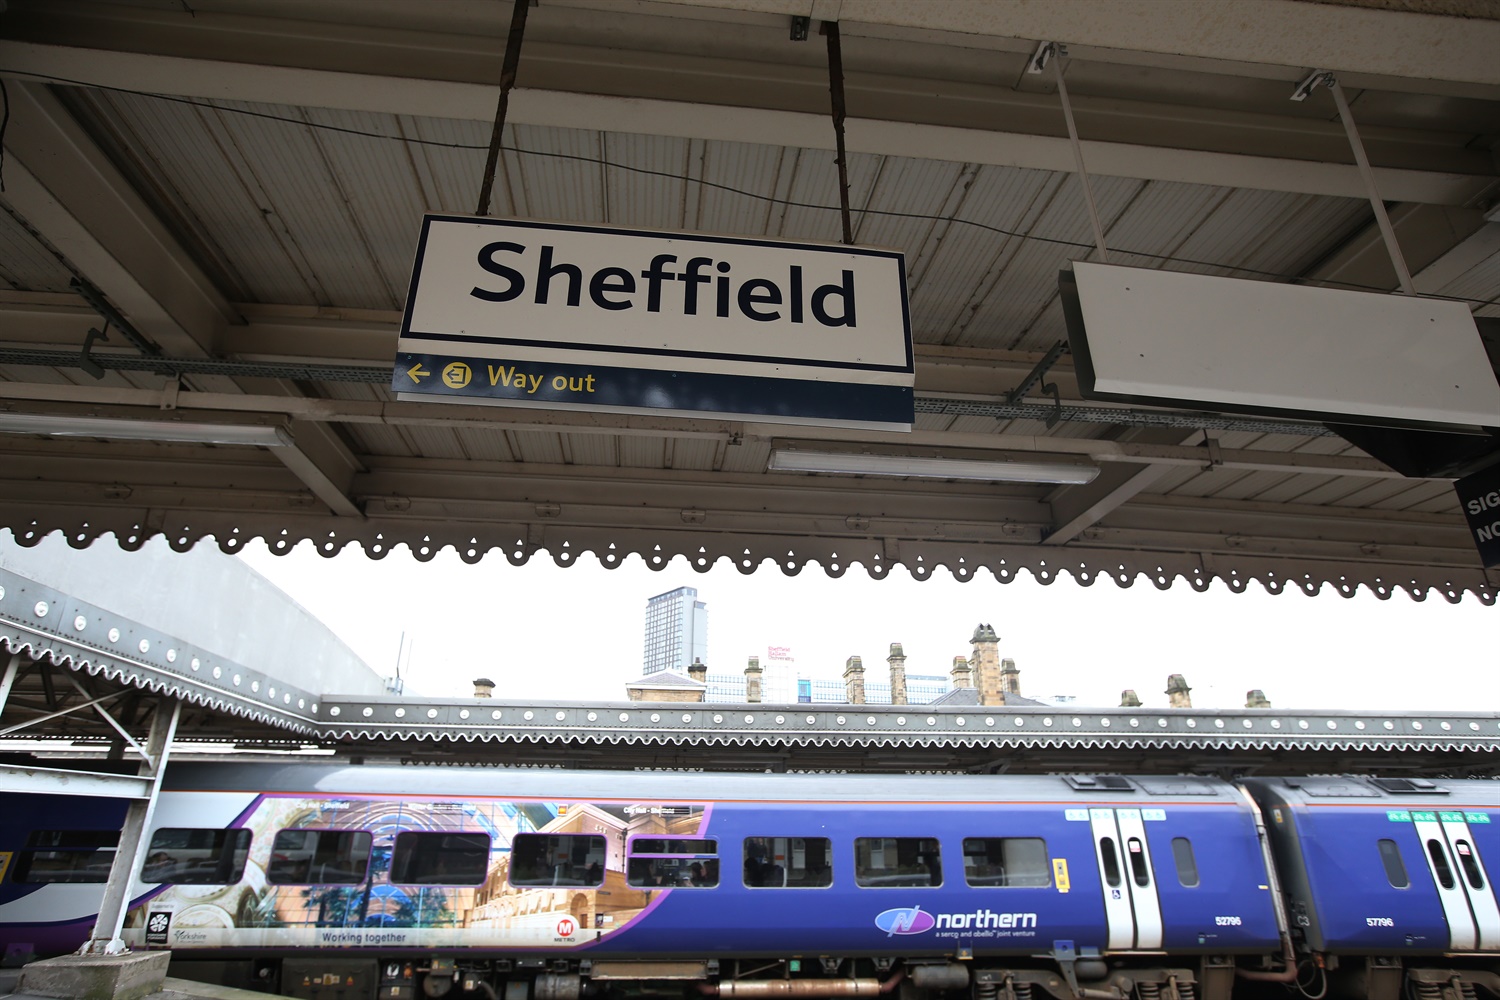 Businesses and MPs at odds over HS2 Sheffield route decision